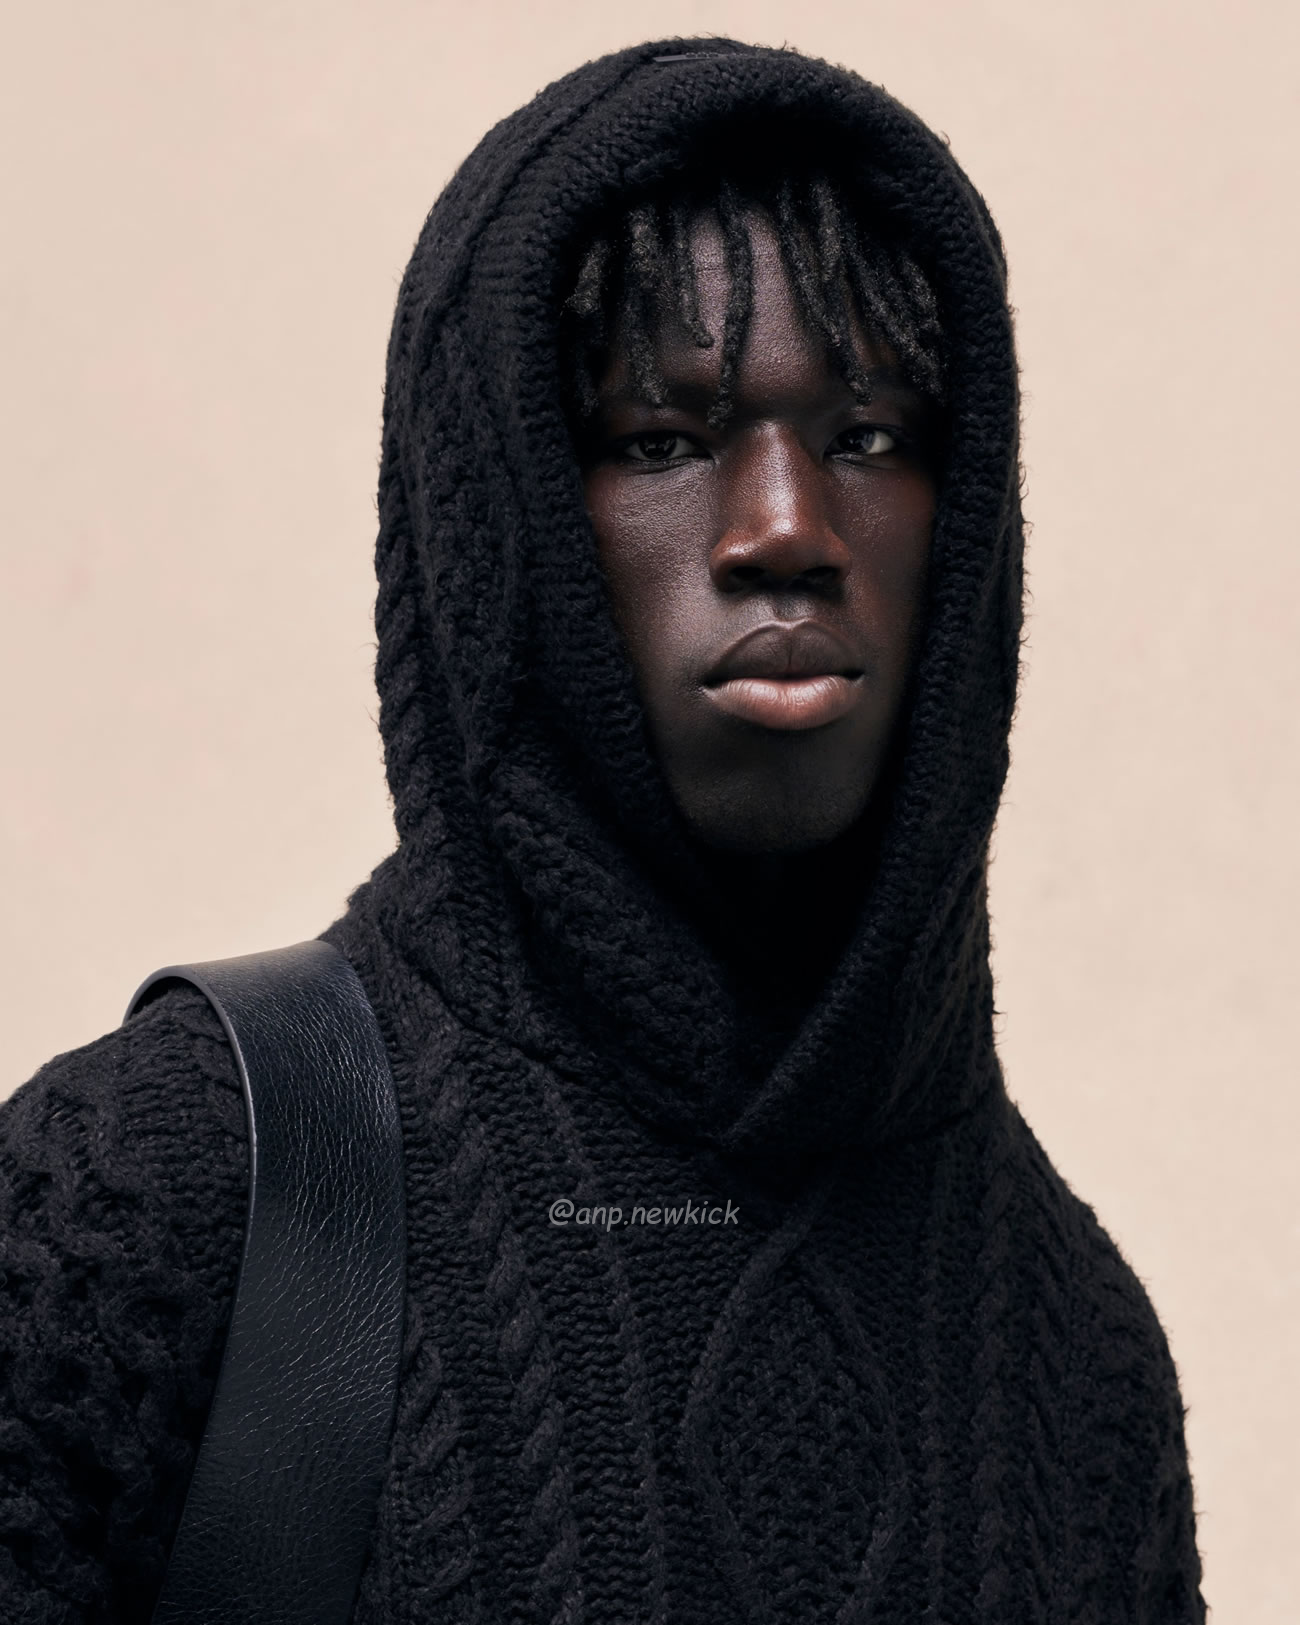 Fear Of God Essentials Fog 23fw New Collection Of Hooded Sweaters In Black Elephant White Beige White S Xl (10) - newkick.org